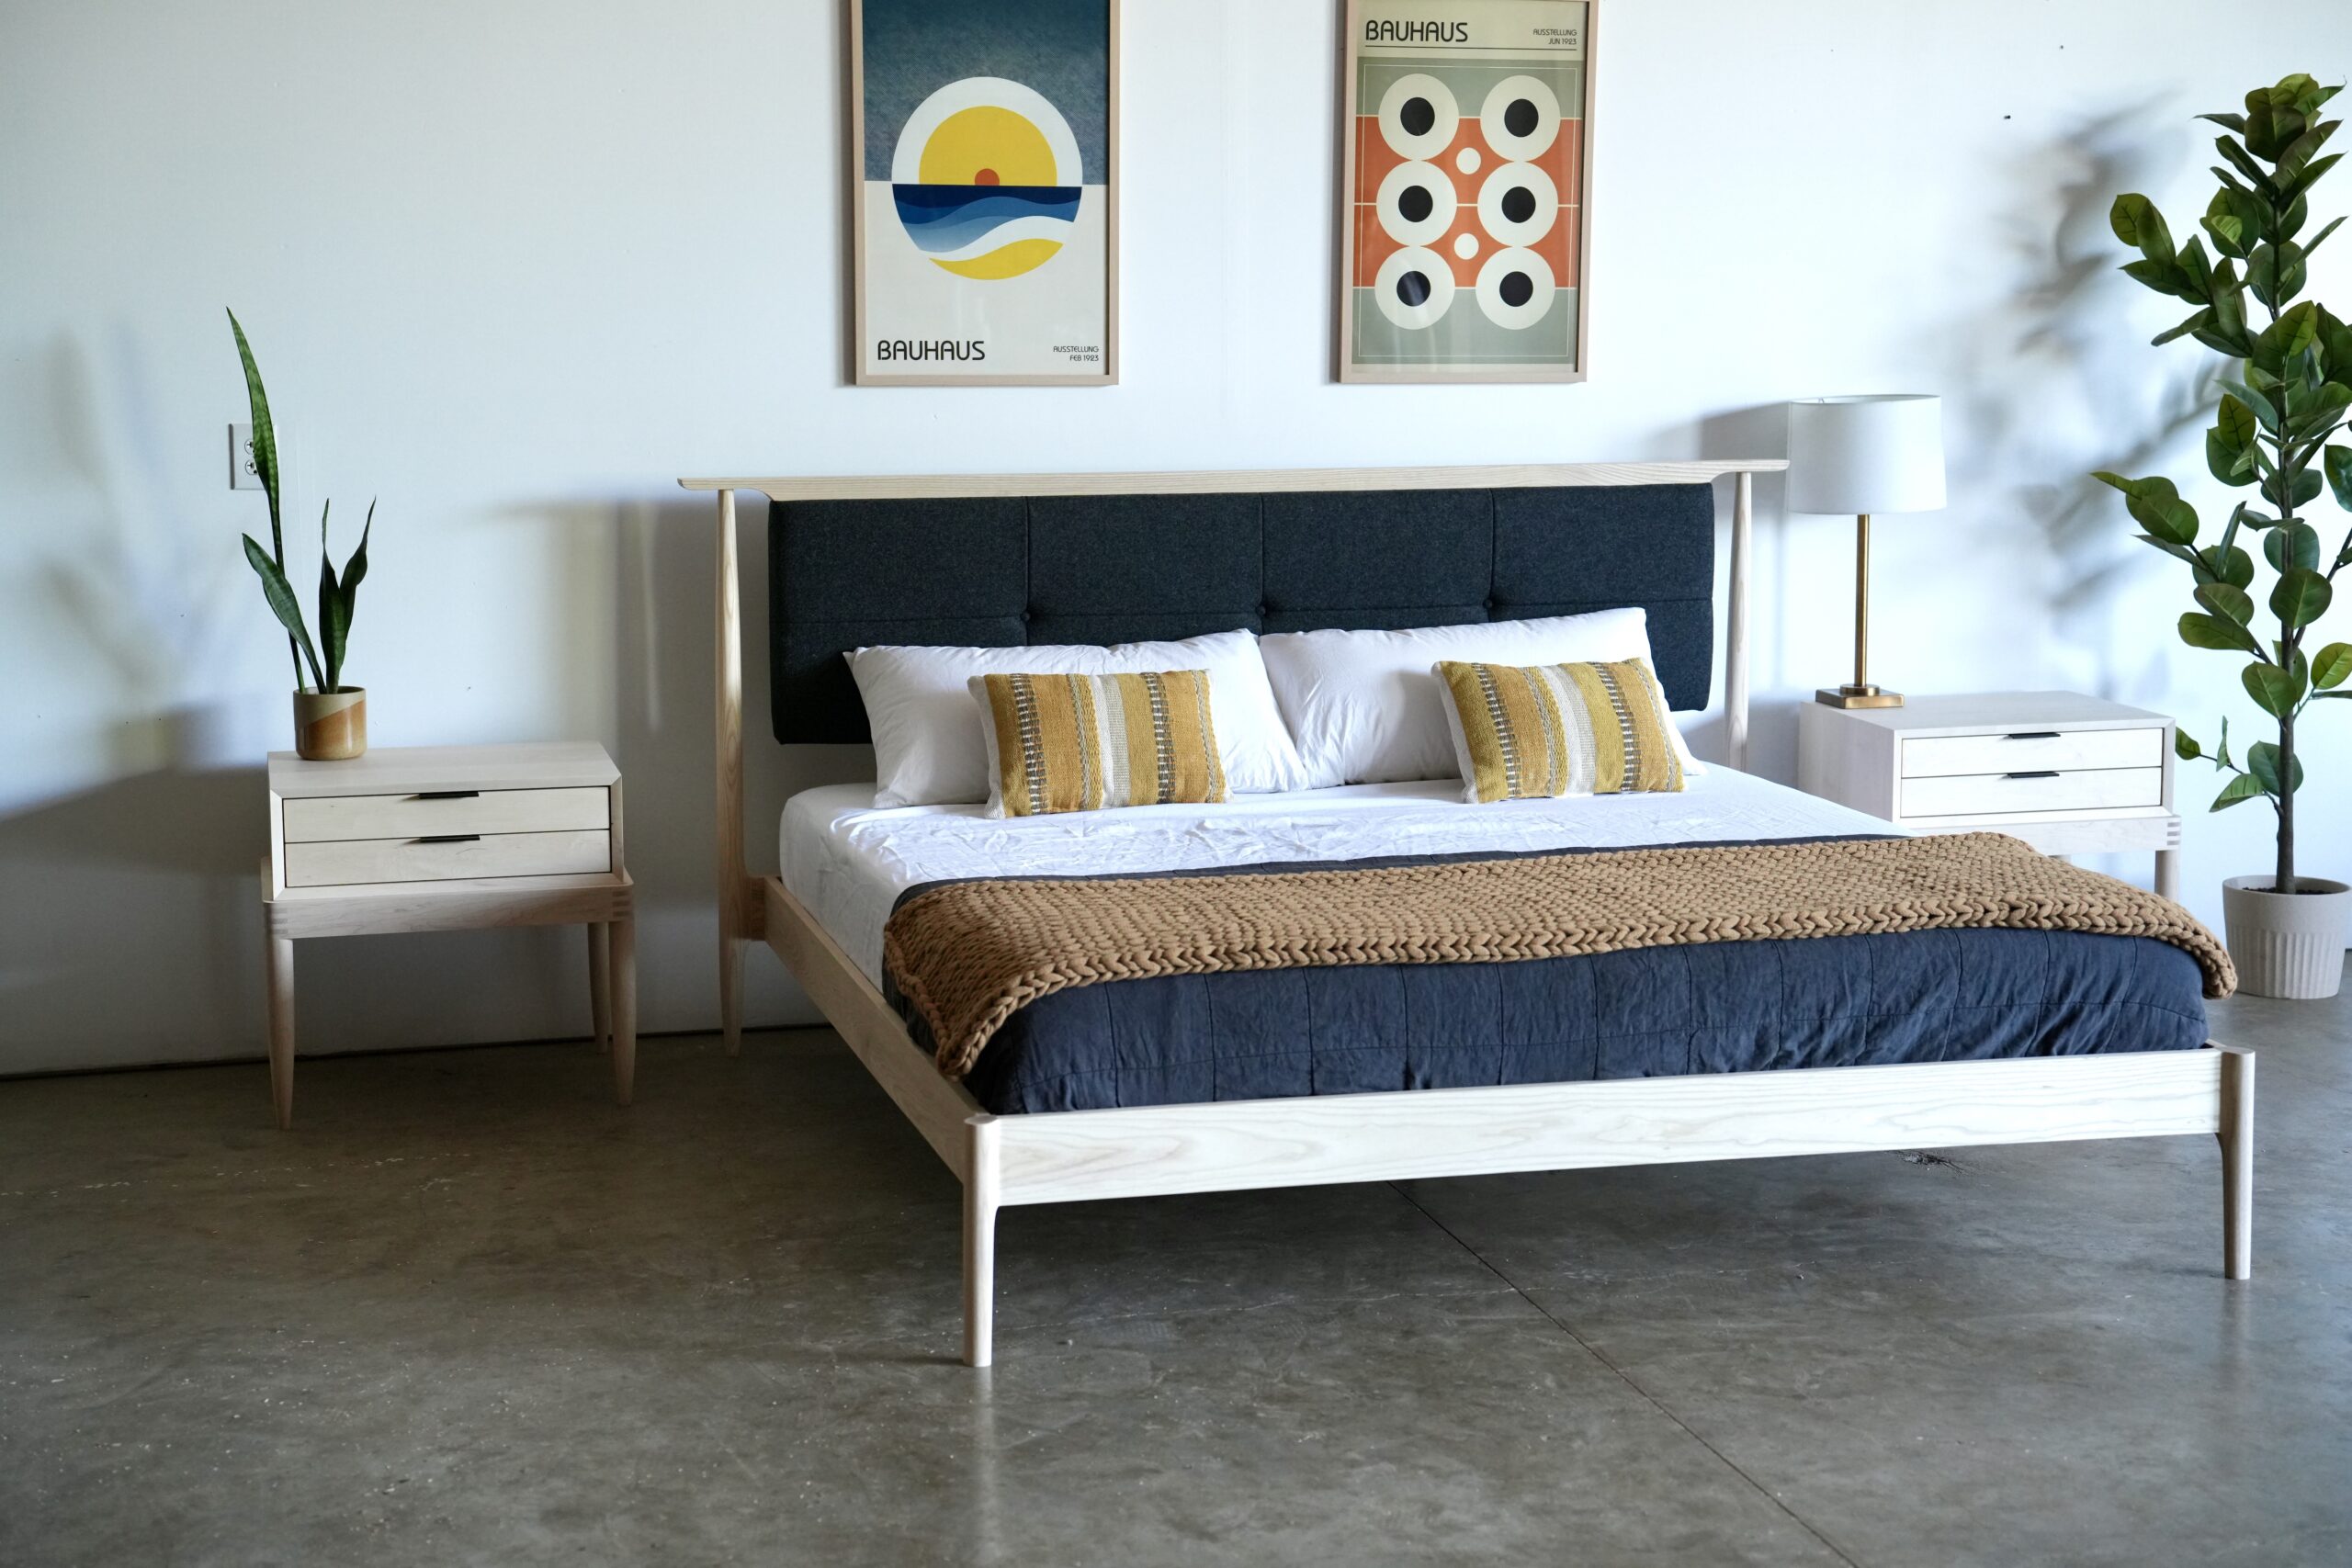 A maple midcentury modern bed with an upholstered headboard that appears to float and drawers suspended from beneath. The headboard is a charcoal color.